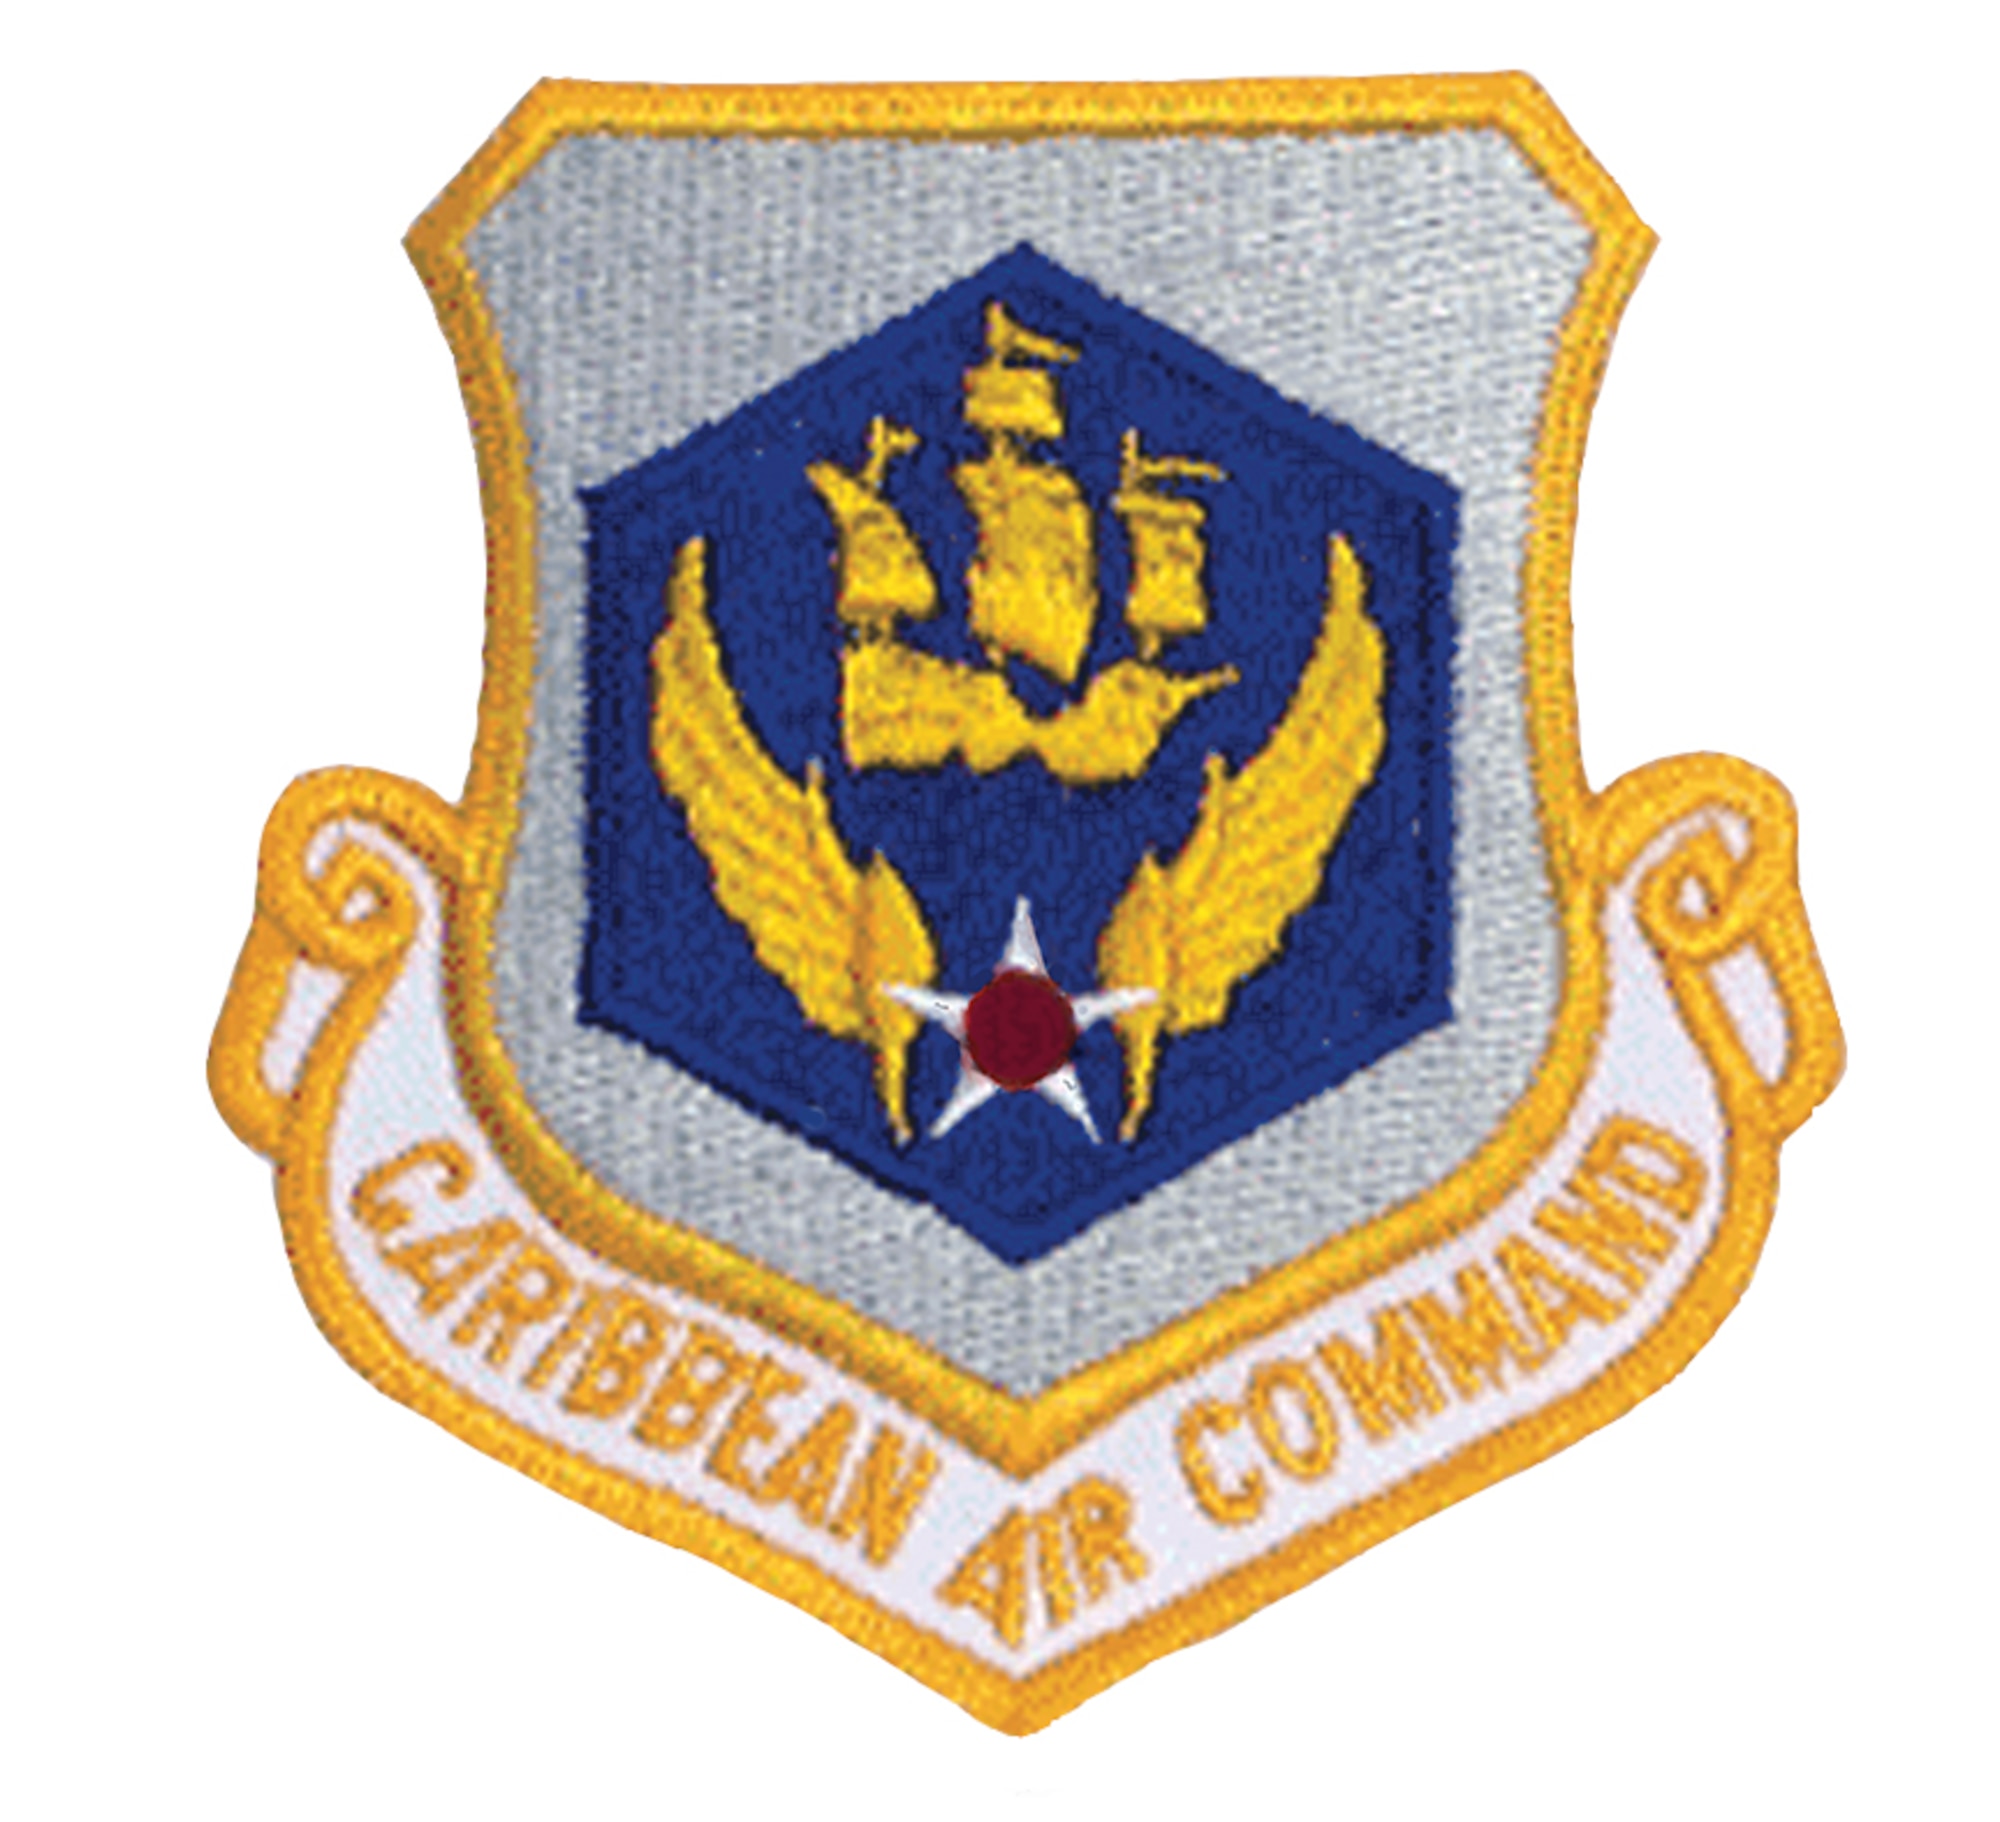 Insignia of the Caribbean Air Command. During its 20-plus years of existence as a U.S. Air Force Major Command, medical personnel from the Caribbean Air Command were responsible for delivering health care in a wide variety of challenging environments across dozens of different nations in one of the largest geographic Air Commands in the world.